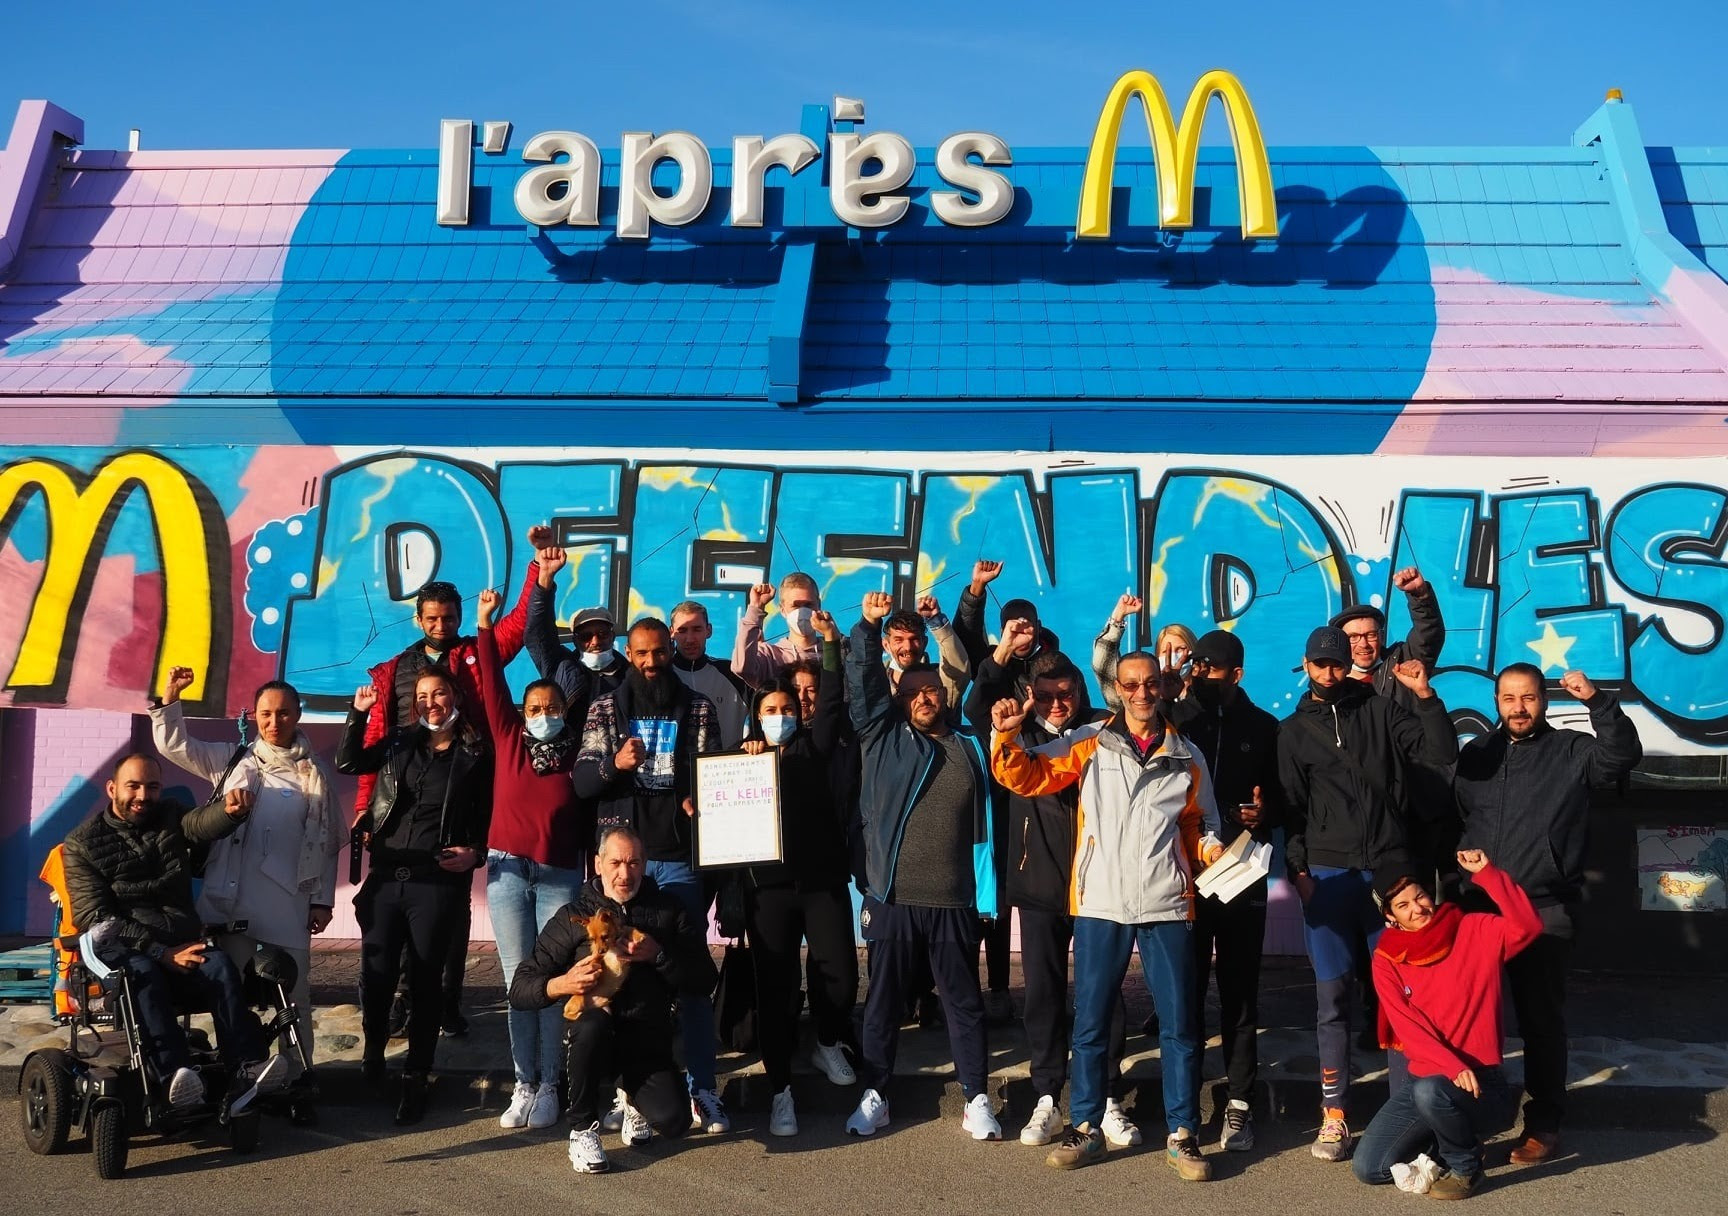 Volunteers and staff of the Après M posing in front of the reconverted McDonald's building